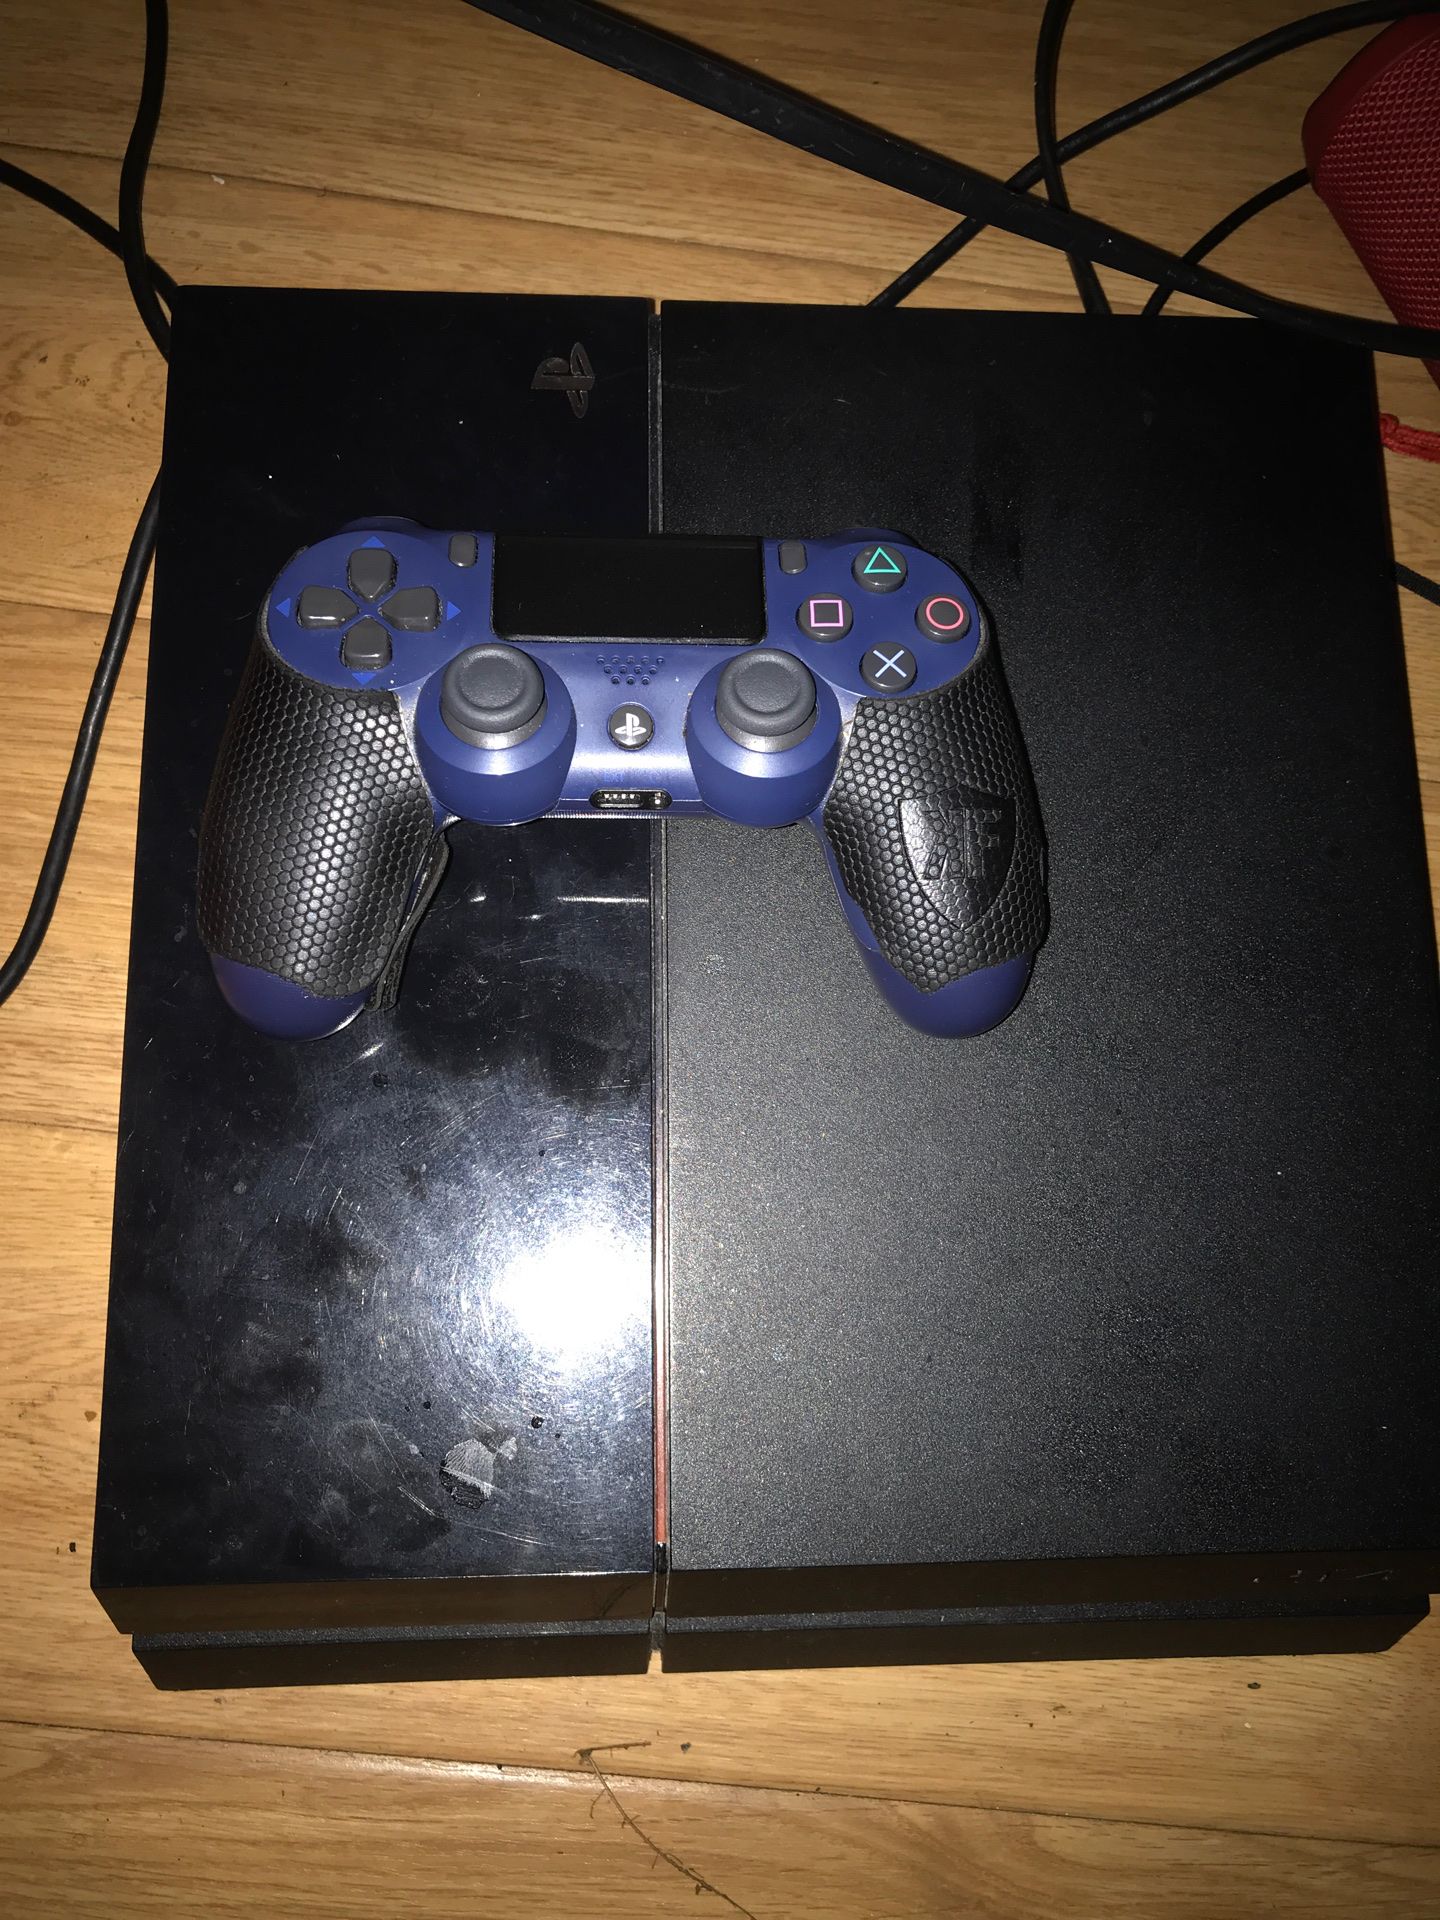 Ps4, 500GB, Navy Blue Controller with Grips on Handles